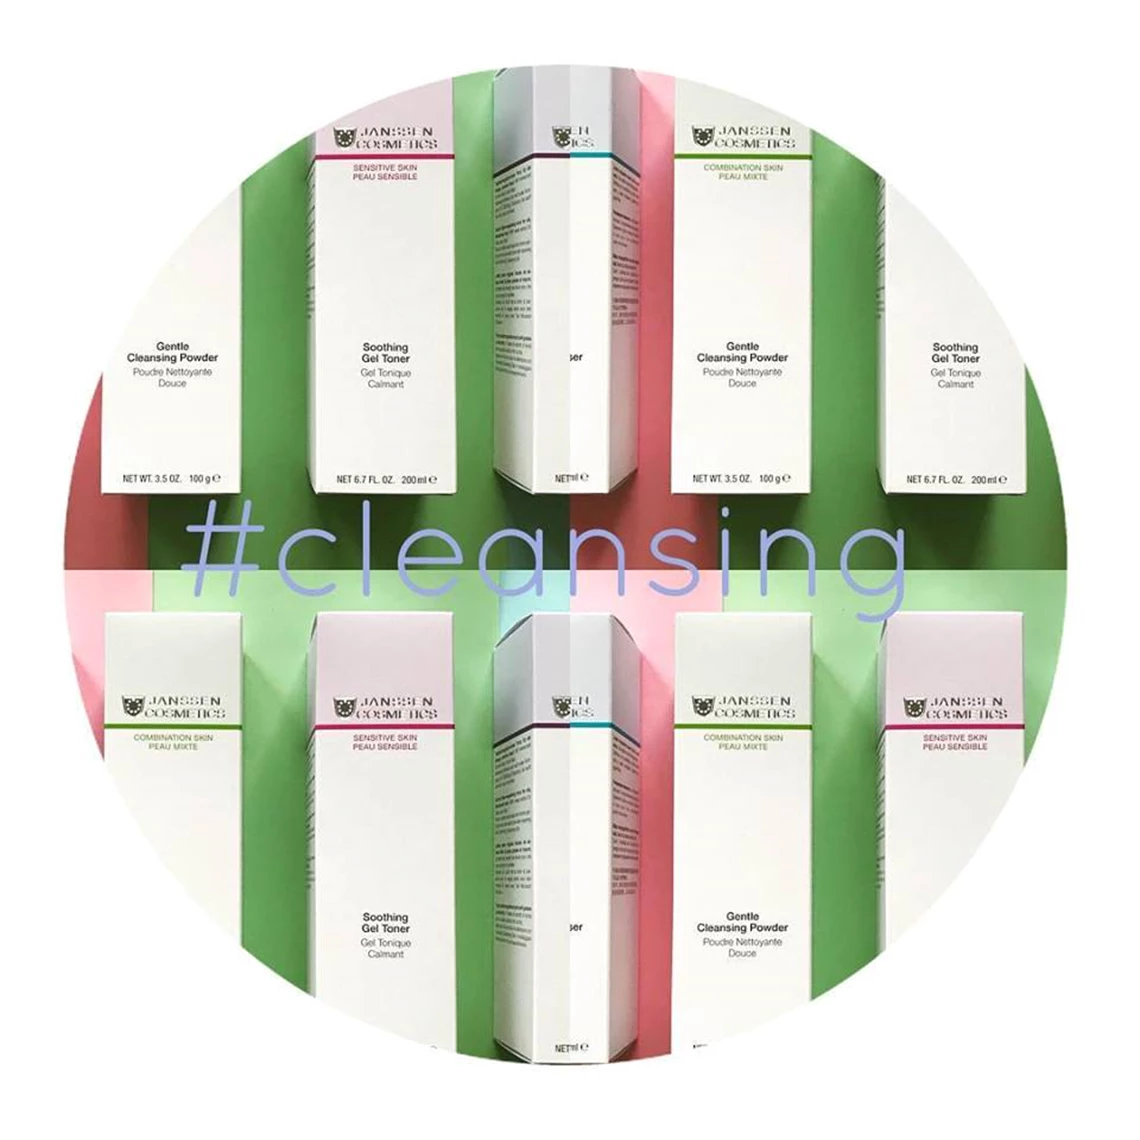 Cleansing by Janssen Cosmetics 2